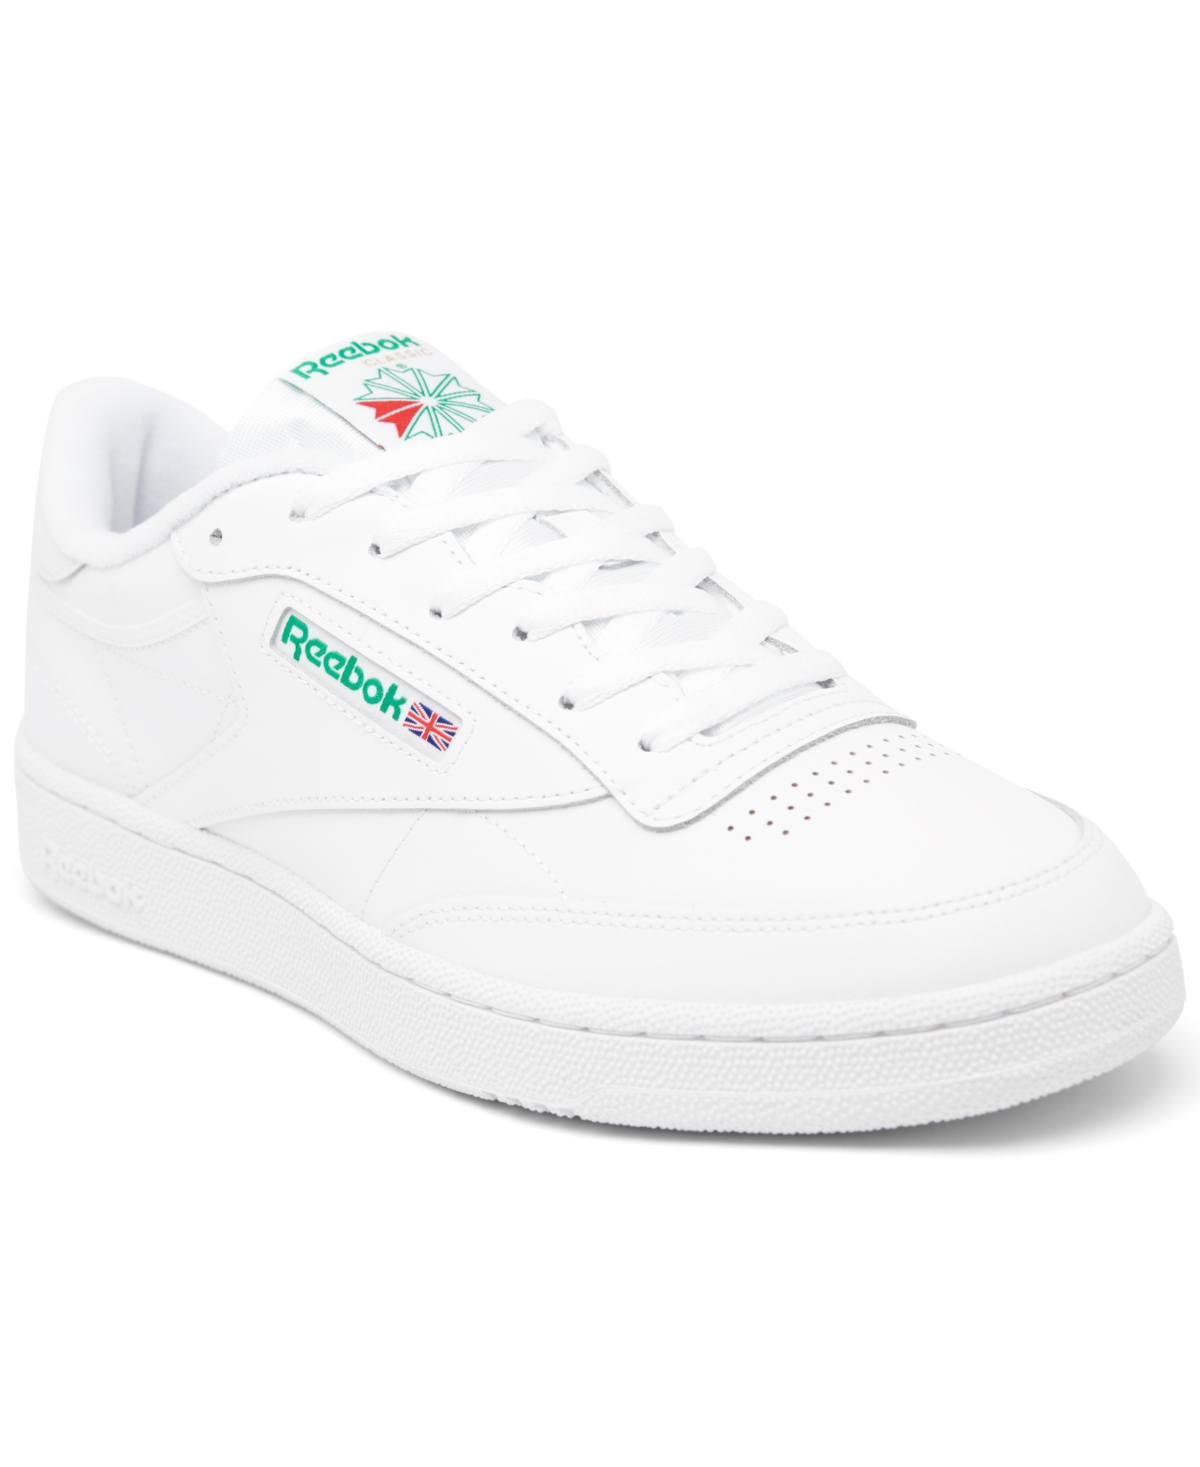 Reebok Men's Club C 85 Casual Sneakers from Finish Line